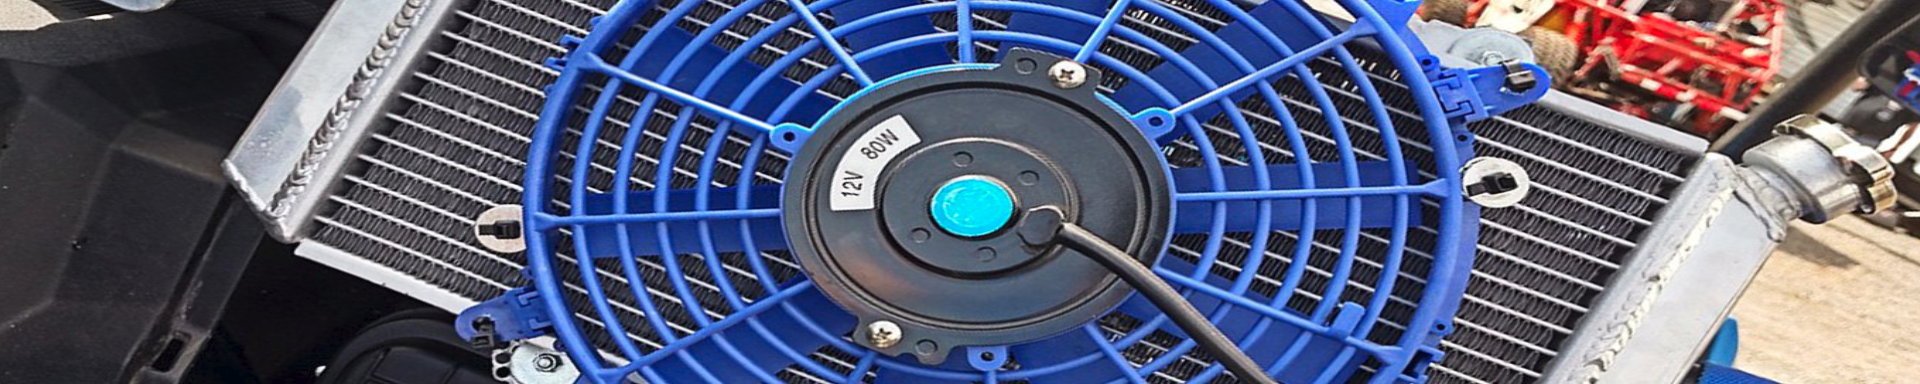 Cooling Fans | MunroPowersports.com | Munro Industries mp-100803080402